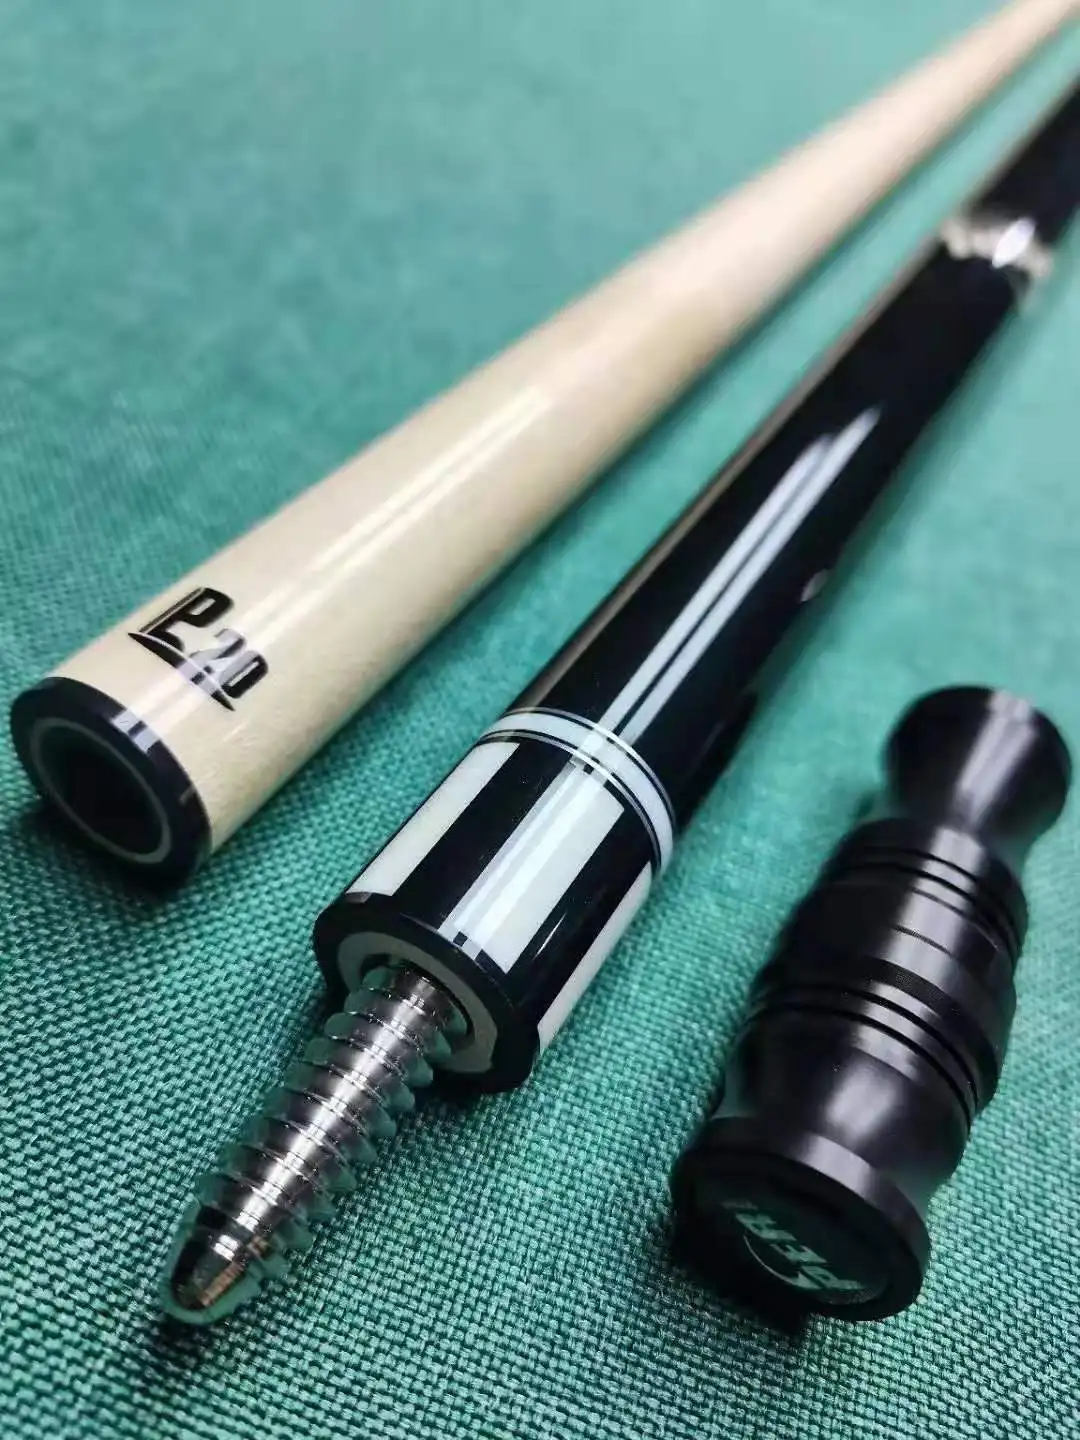 Peri Billiard Cue Stick Jayson Shaw Endorsed St-01 Hard Maple Pool Cue Stick  With Same Size Of Predator Cue - Buy Peri Billiard,Predator Cue,Pool Cue  Product on Alibaba.com